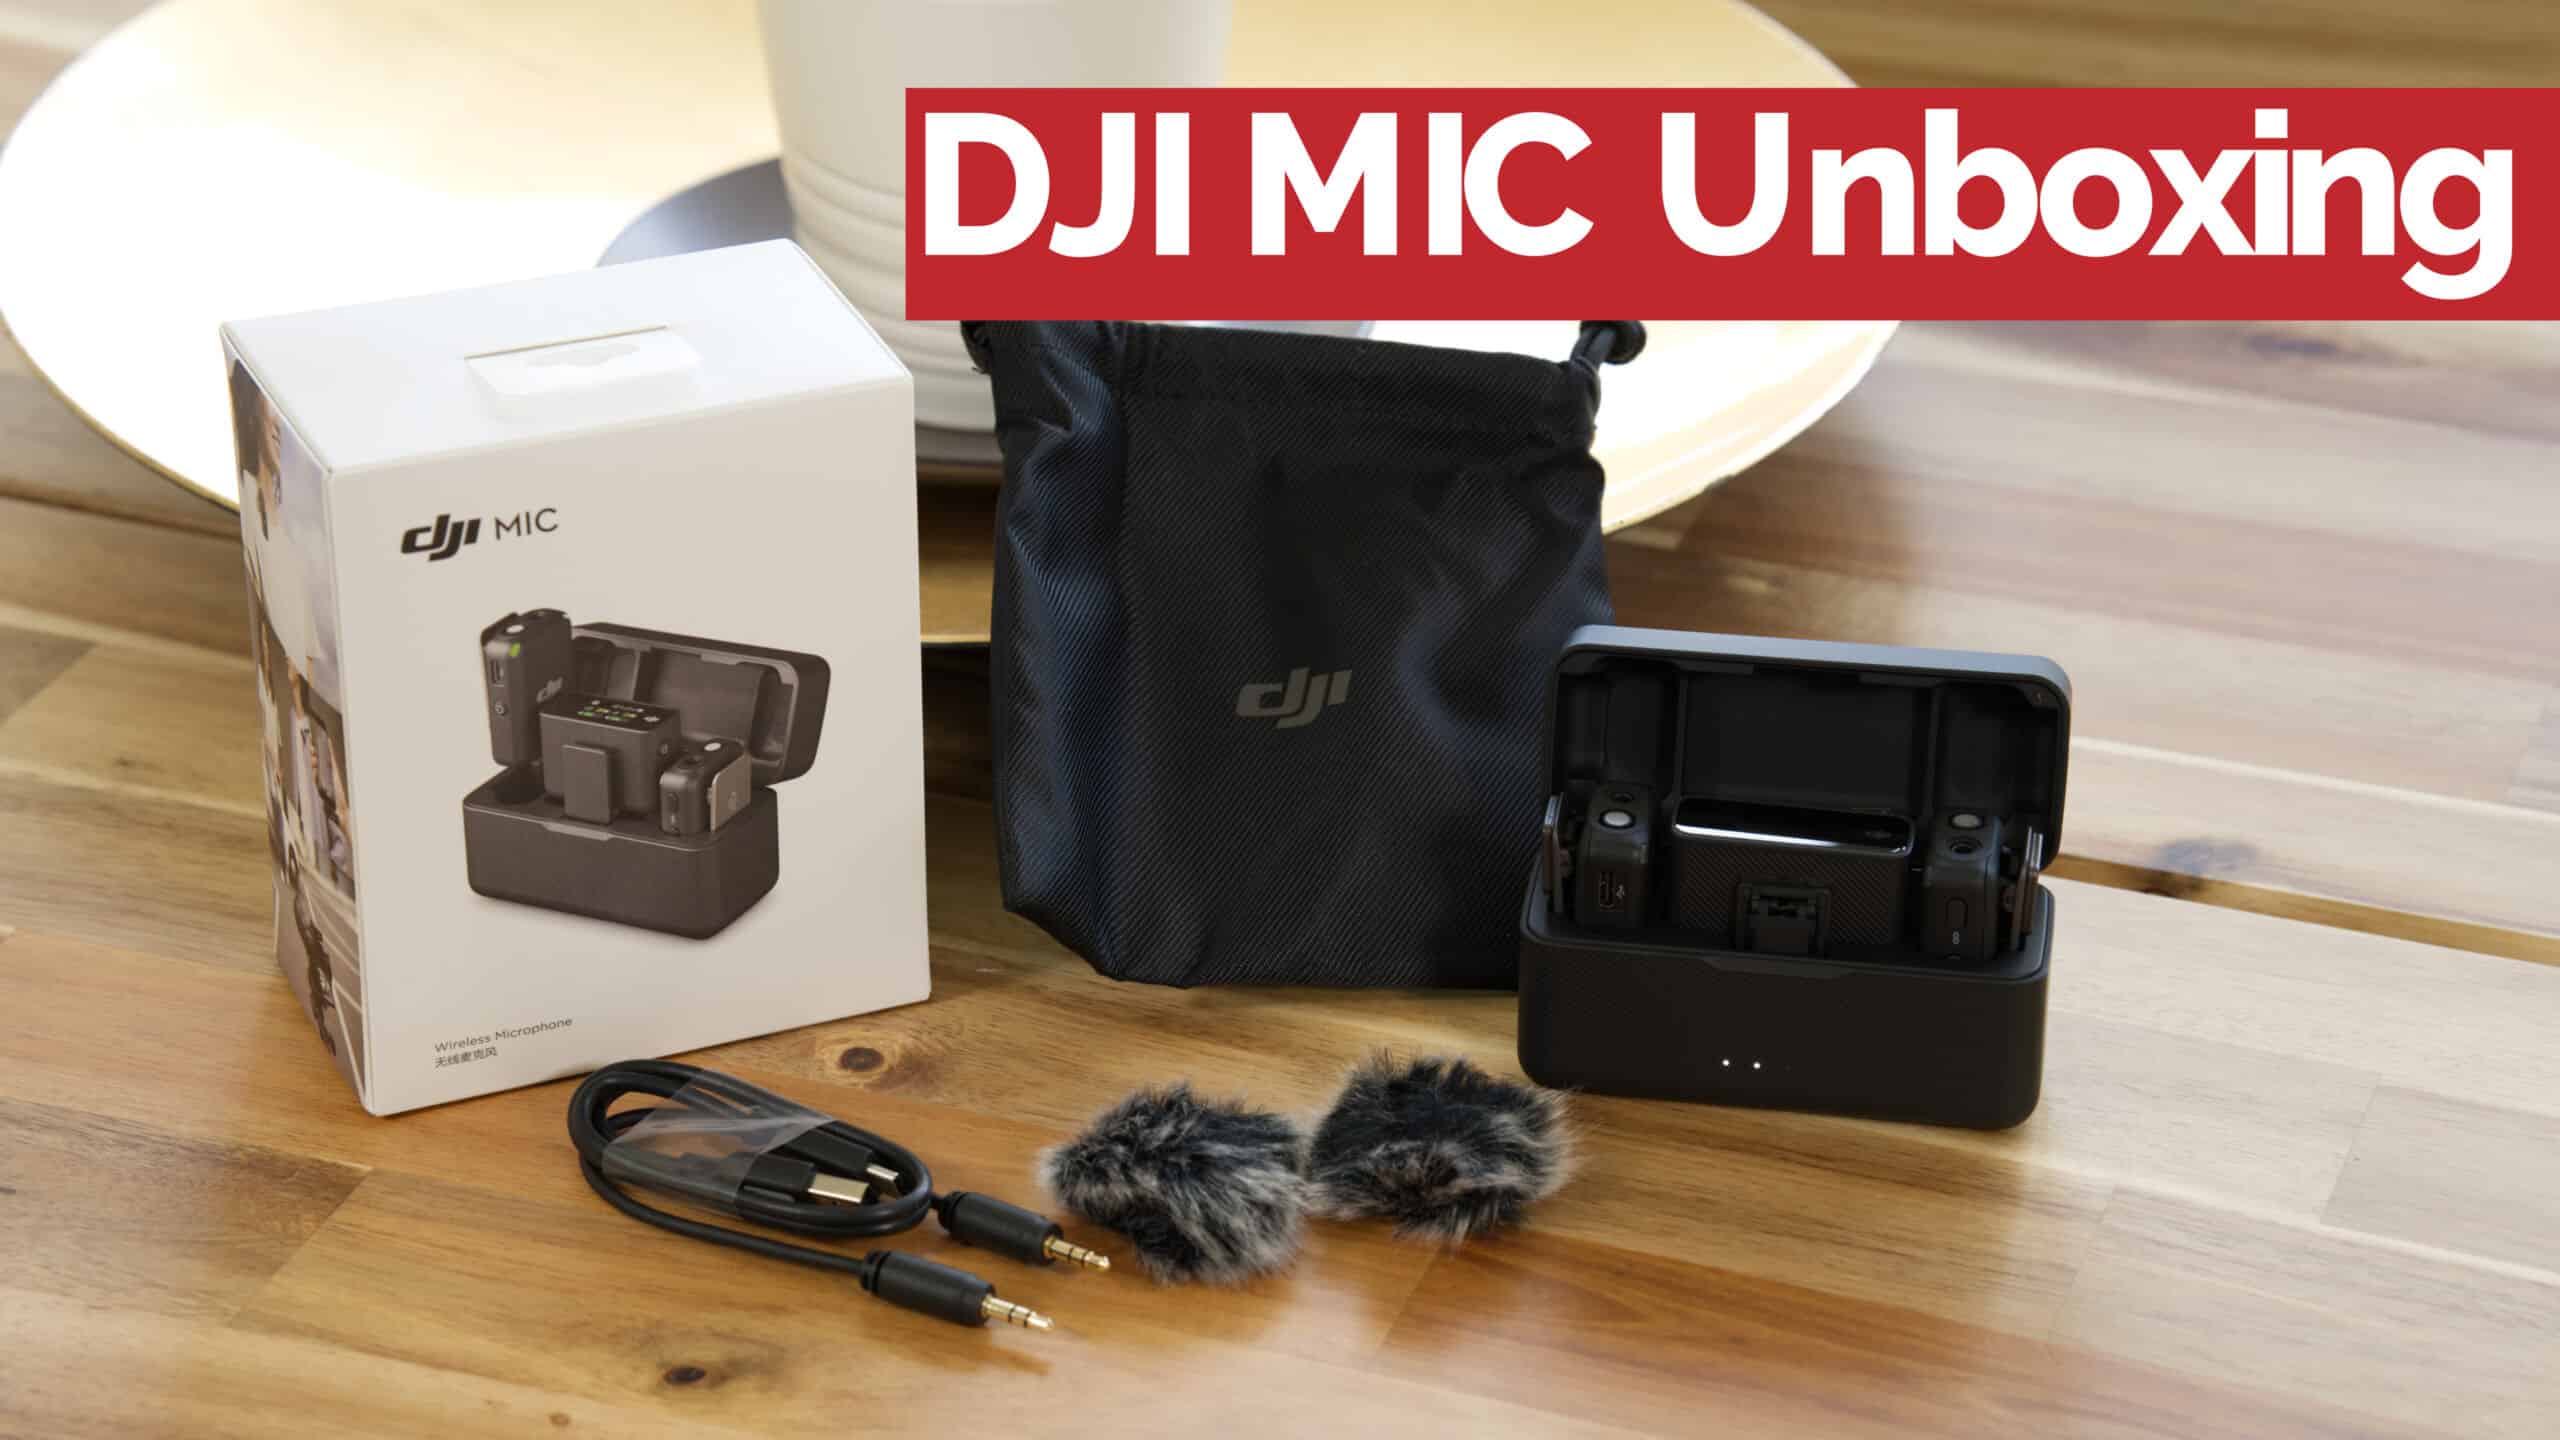 DJI MIC Unboxing Youtube - Bresser-Photography - Hochzeitsfotograf Neuss - Hochzeit - Hochzeitsfotos